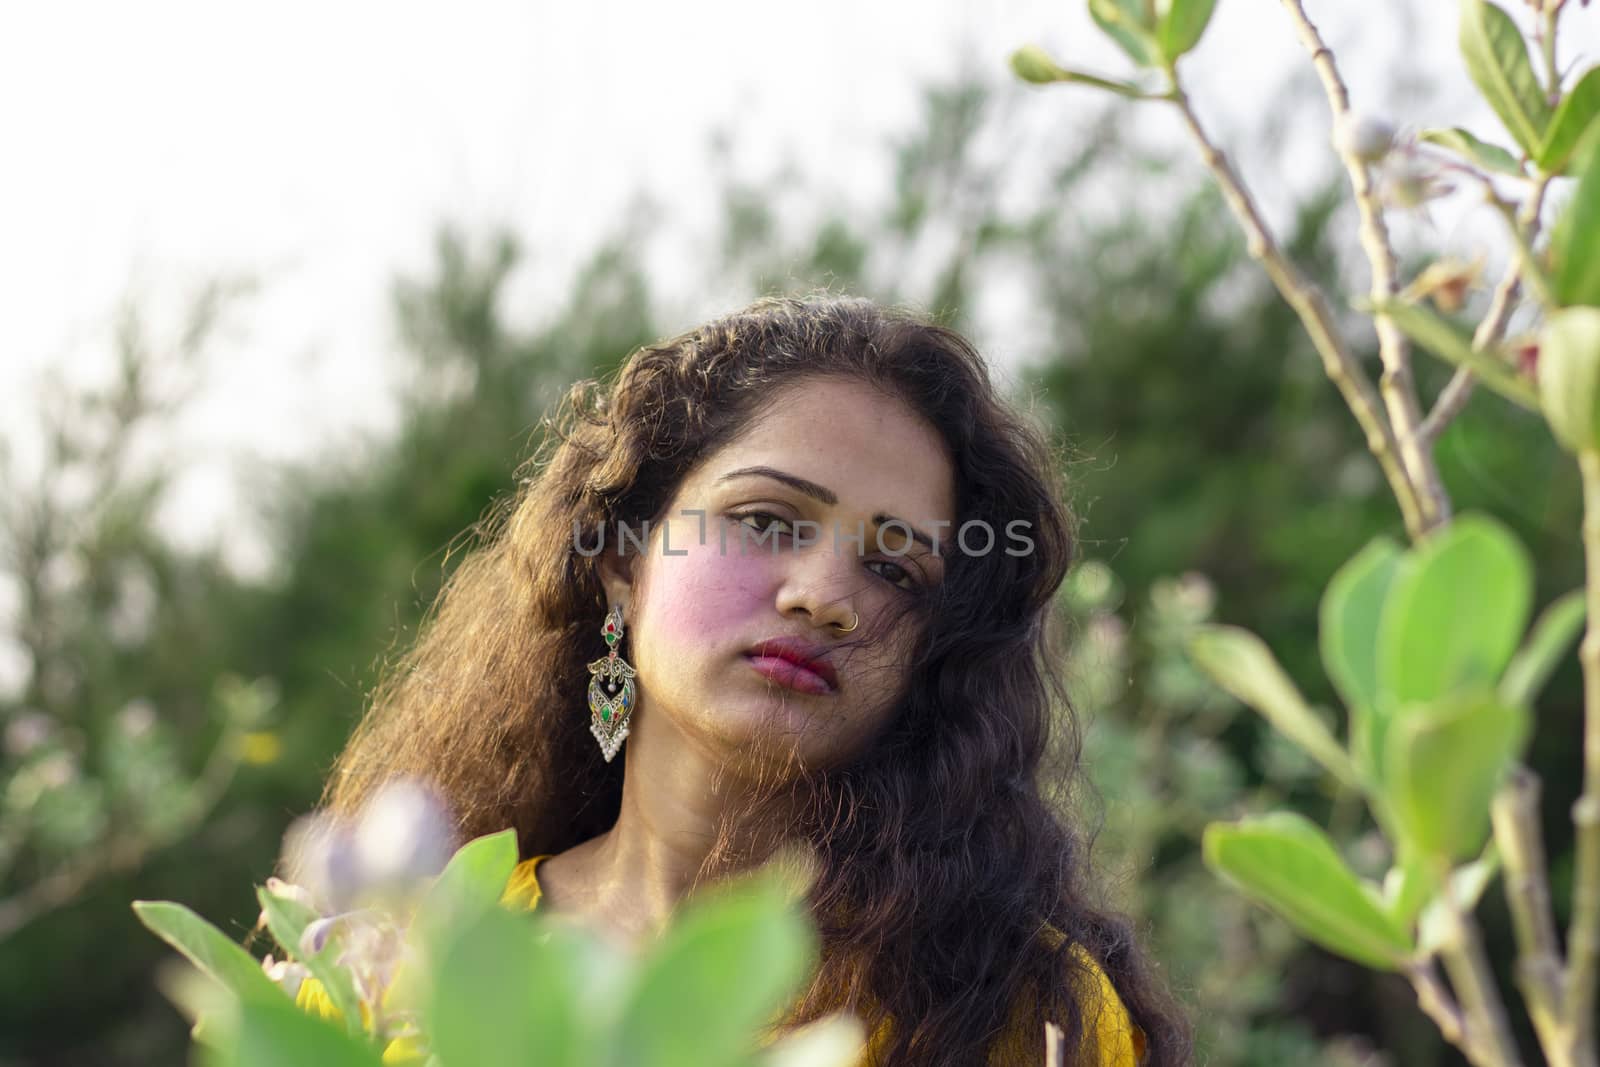 A beautiful Asian woman faces open hair with selective focus points background, outdoors closeup portrait